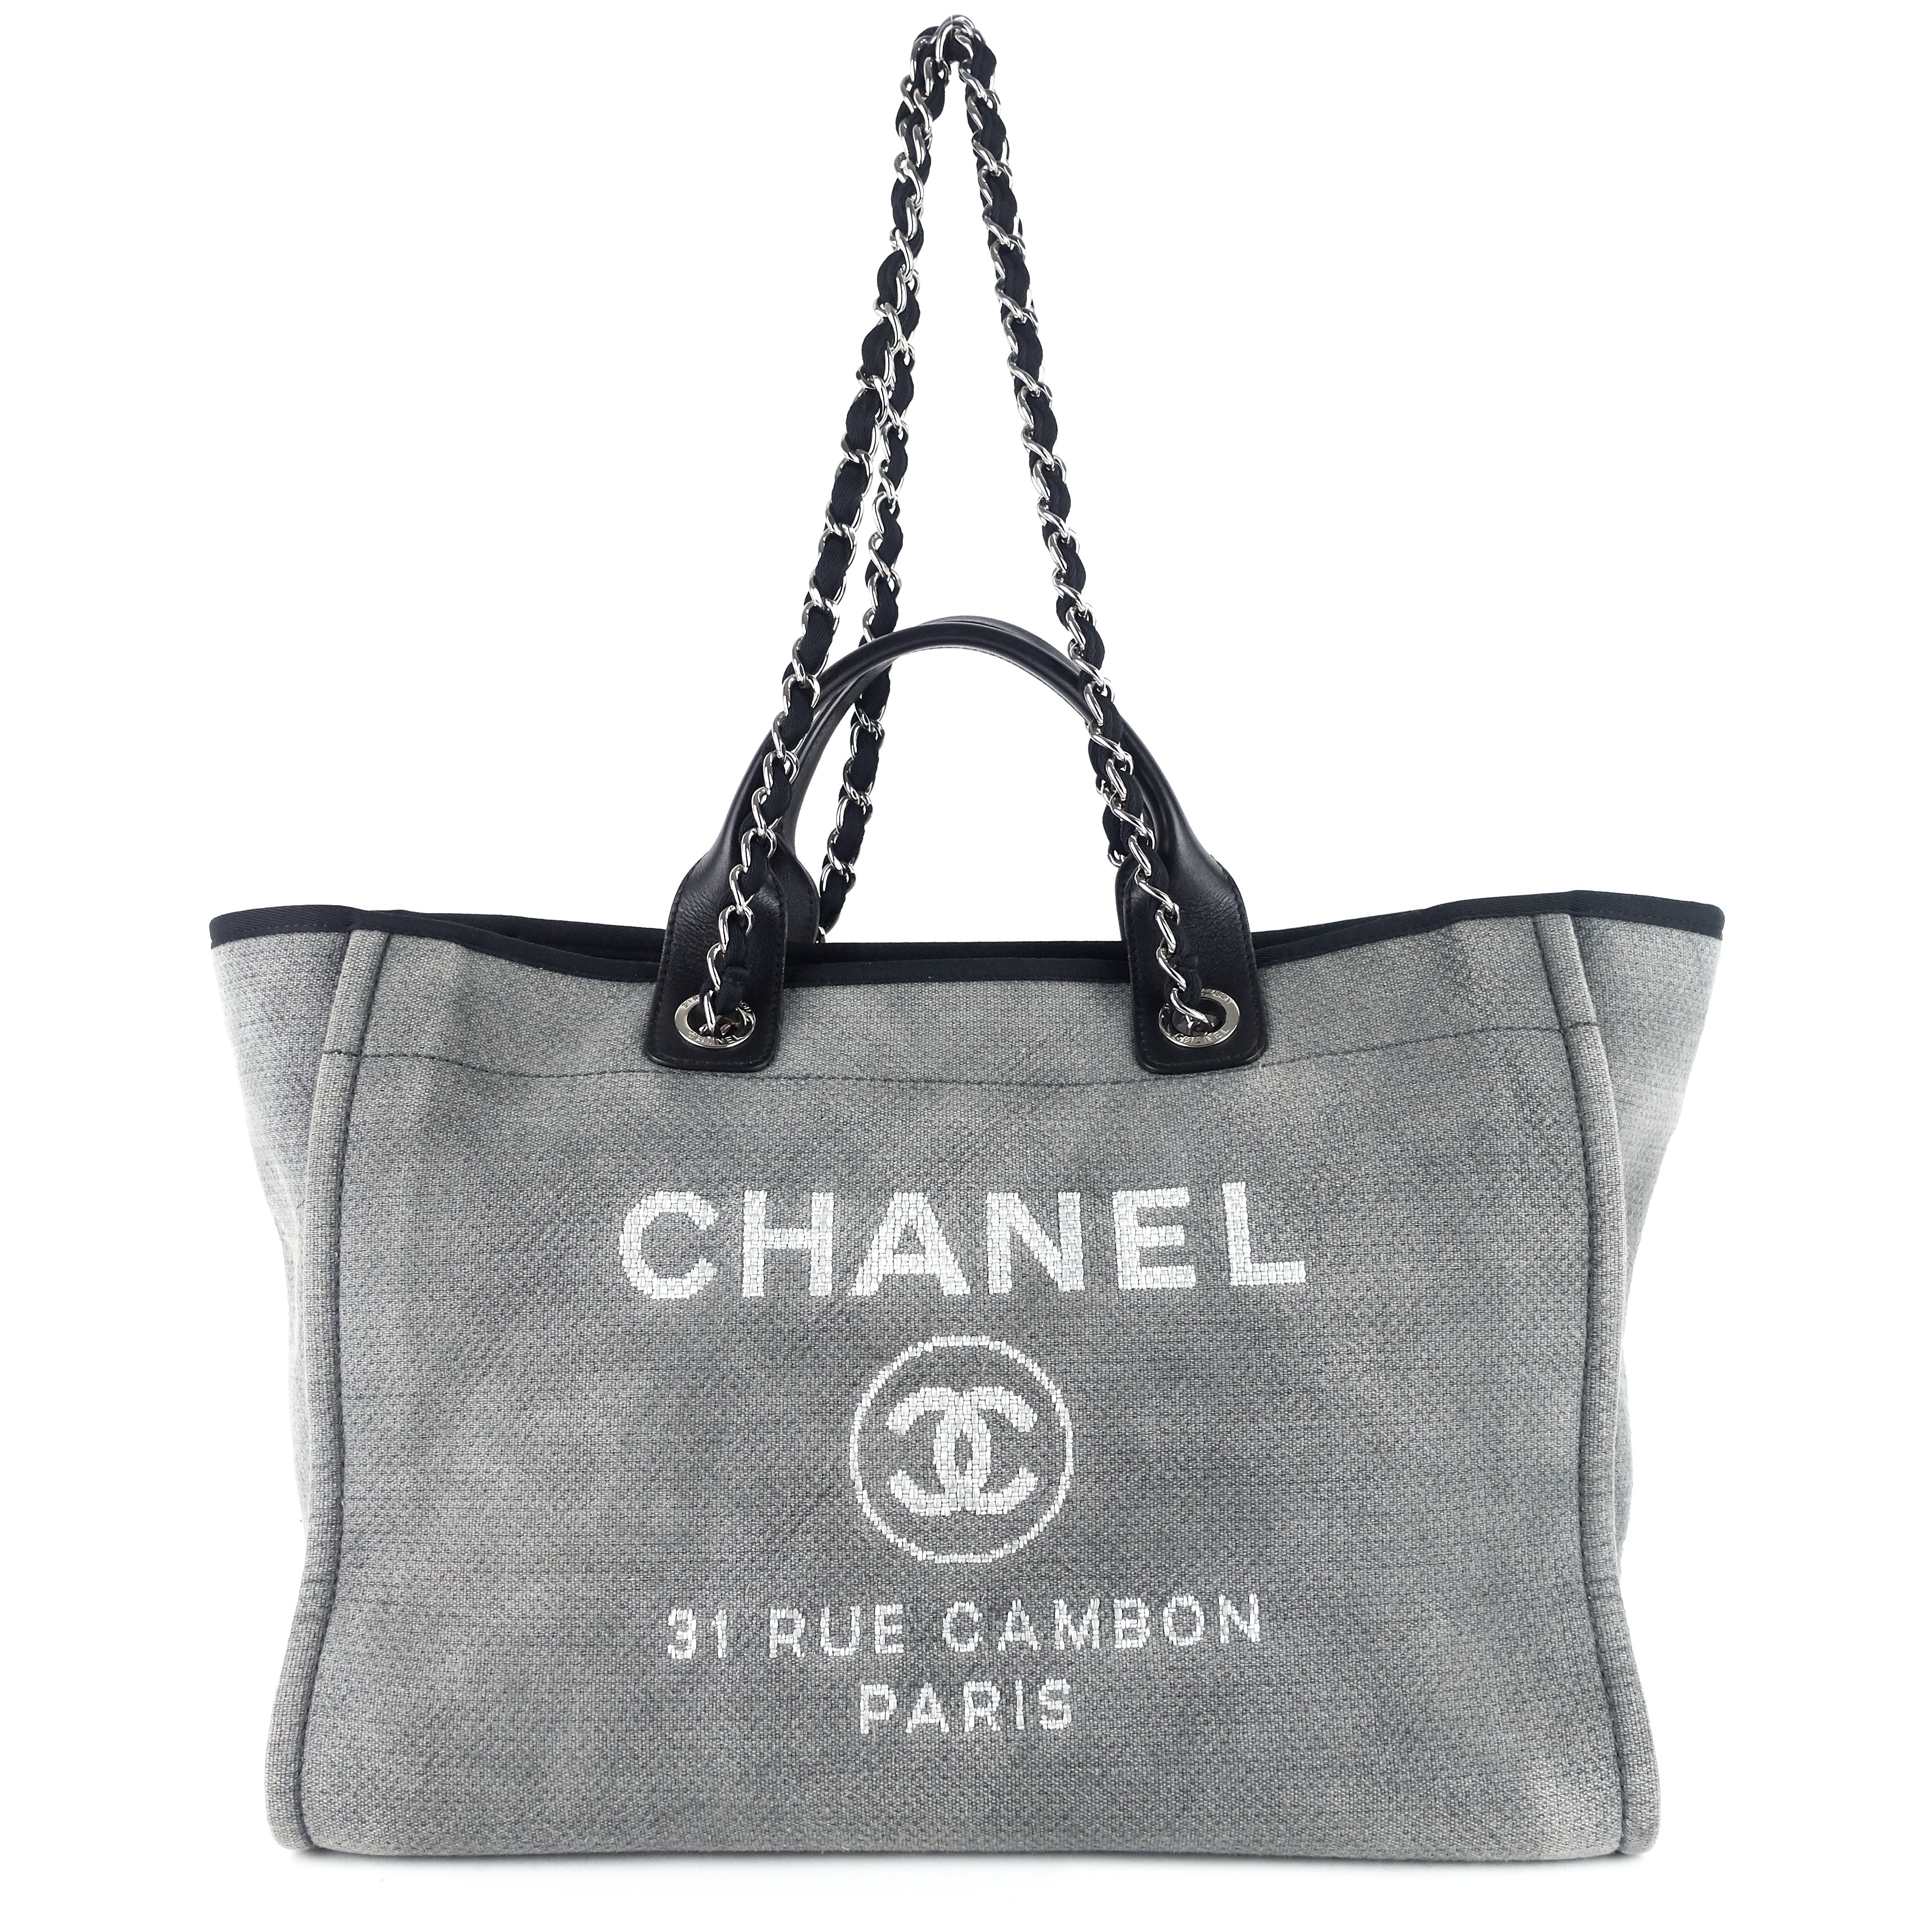 Chanel Small Deauville Shopping Bag Blue and Beige Boucle Light Gold Hardware Beige Madison Avenue Couture